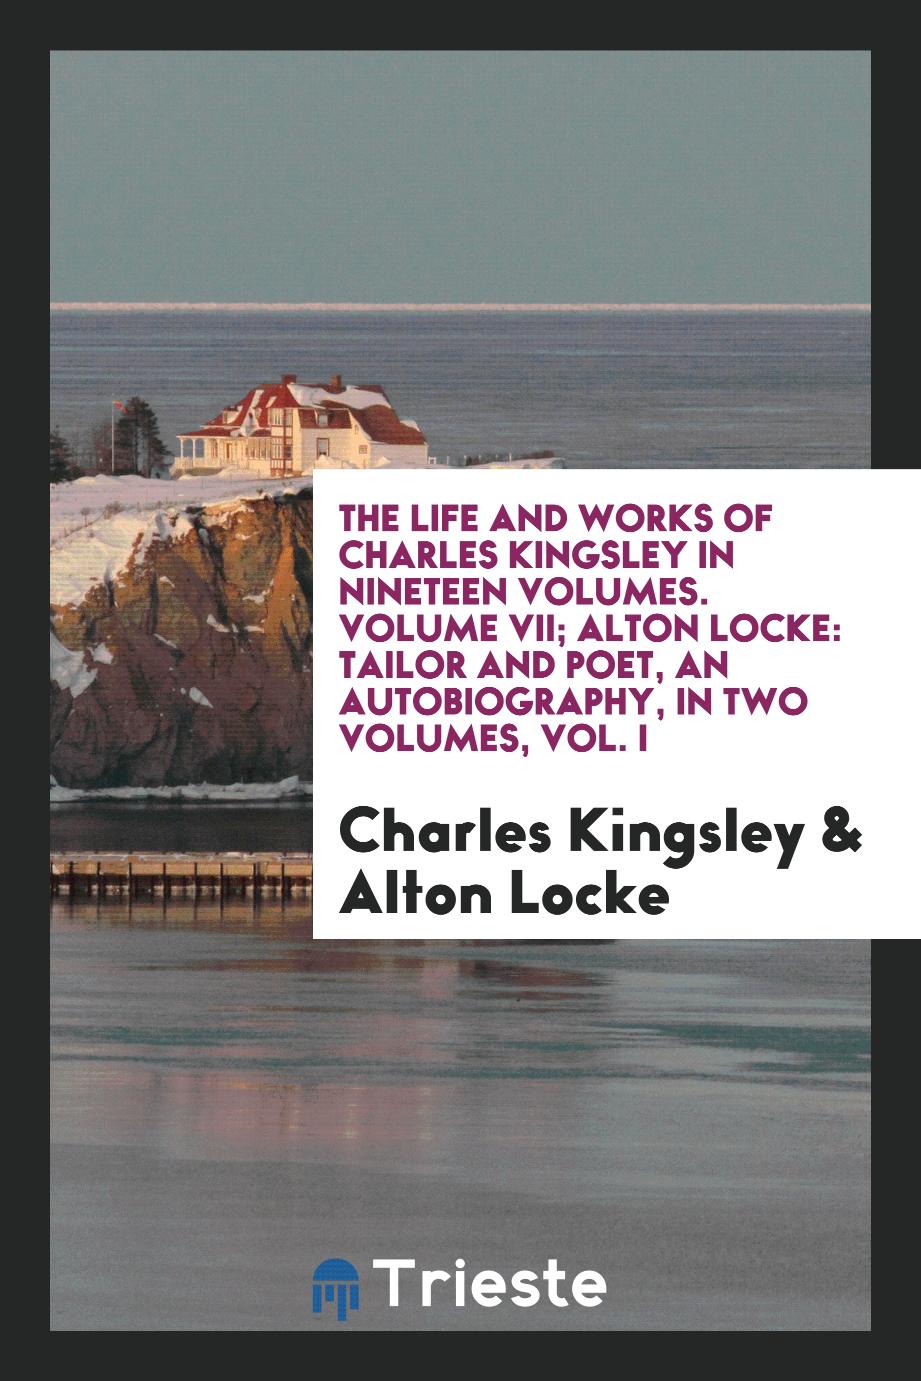 The life and works of Charles Kingsley in nineteen volumes. Volume VII; Alton Locke: Tailor and Poet, an autobiography, in two volumes, Vol. I